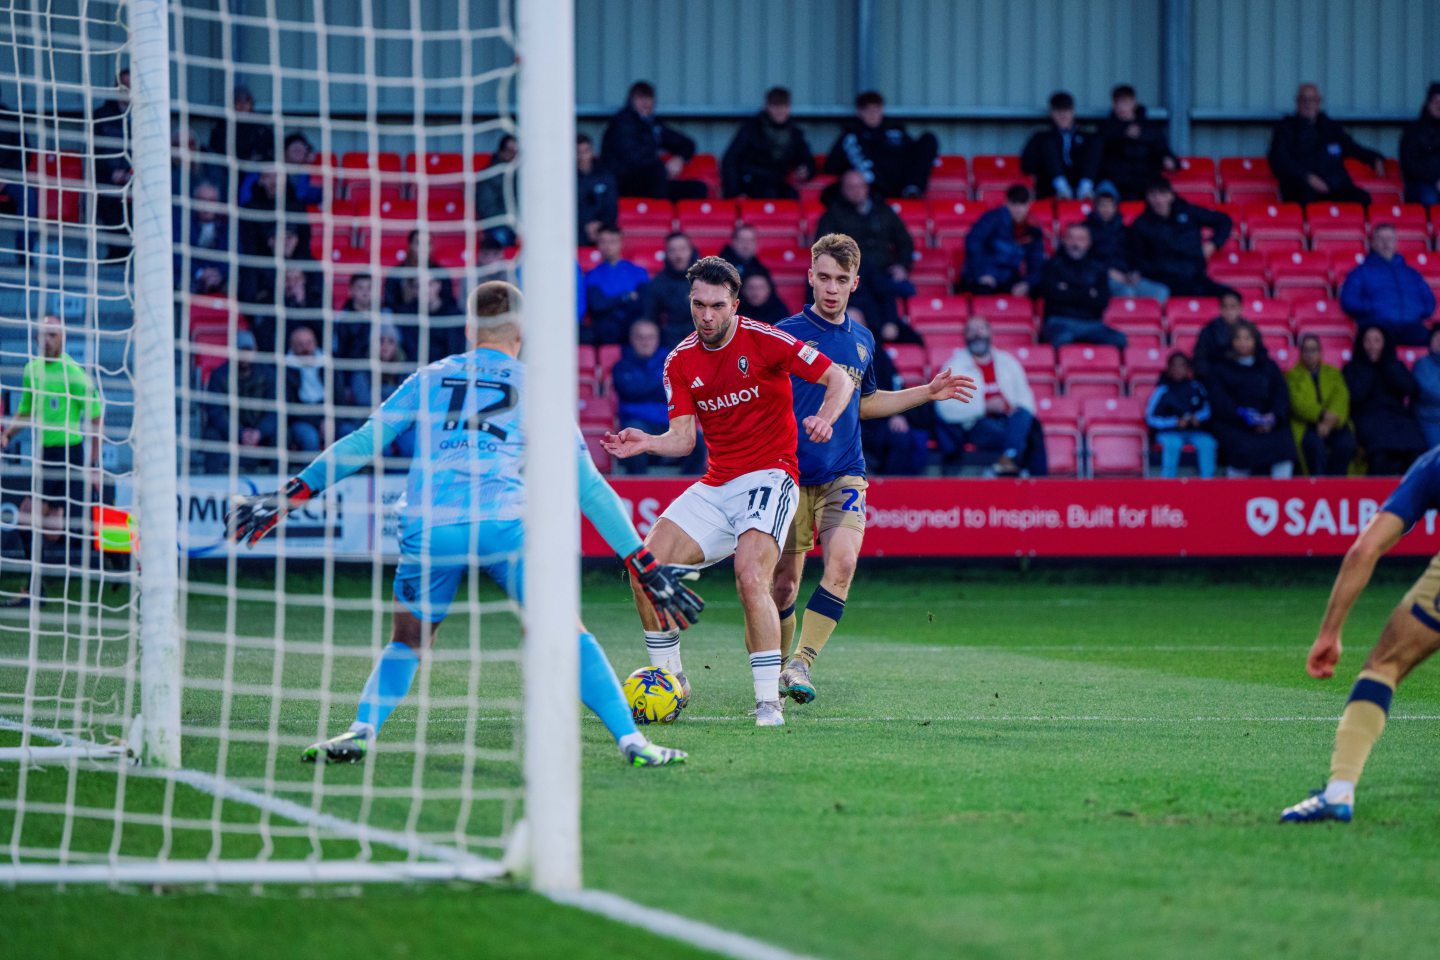 Salford City winger Connor McLennan in action for the English League One club. Image supplied by Salford City 